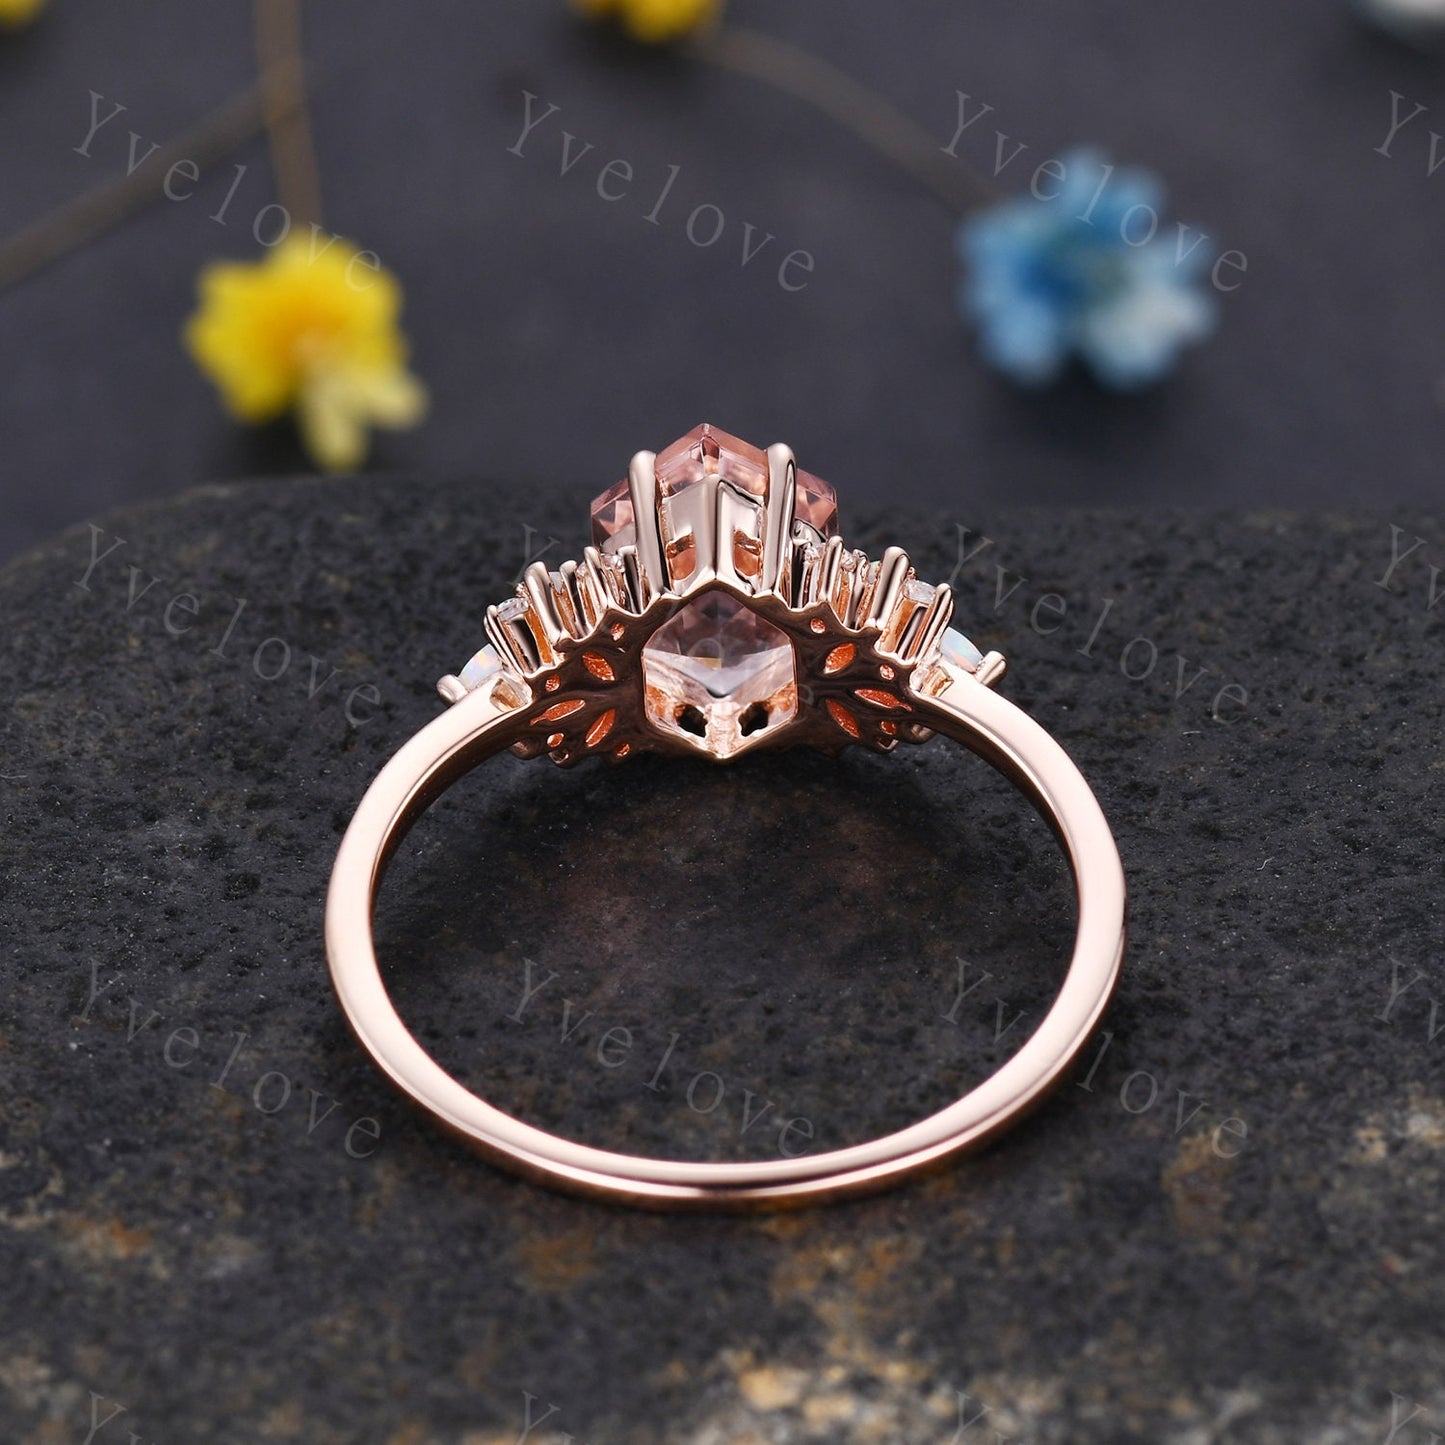 Vintage Hexagon Morganite Opal engagement ring,Unique Marquise Opal Ring,Cluster Ring,Rose Gold,Women Bridal Wedding Band,Statement Ring